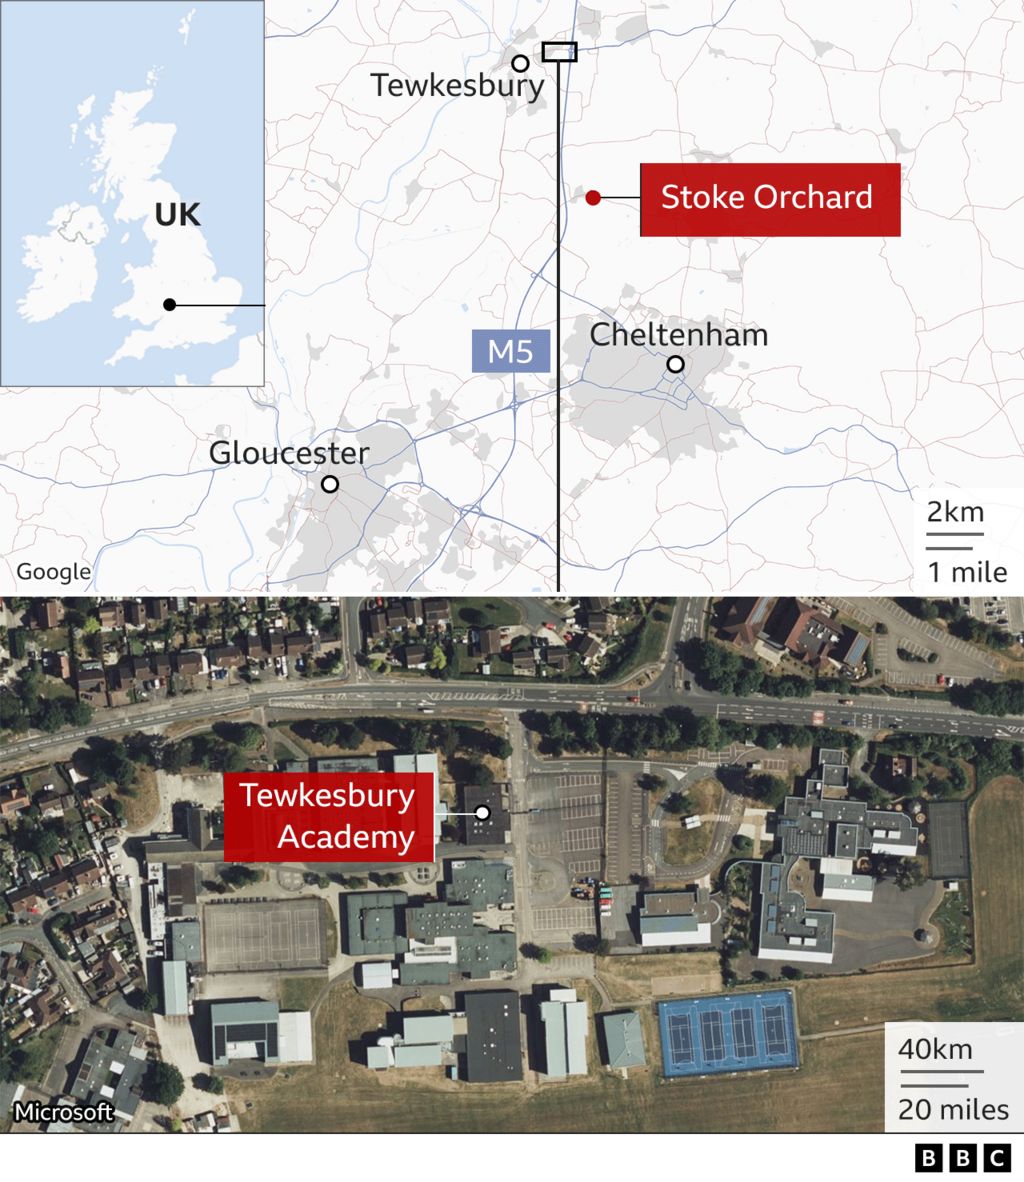 A map showing the location of Tewkesbury Academy and the distance that the suspect travelled